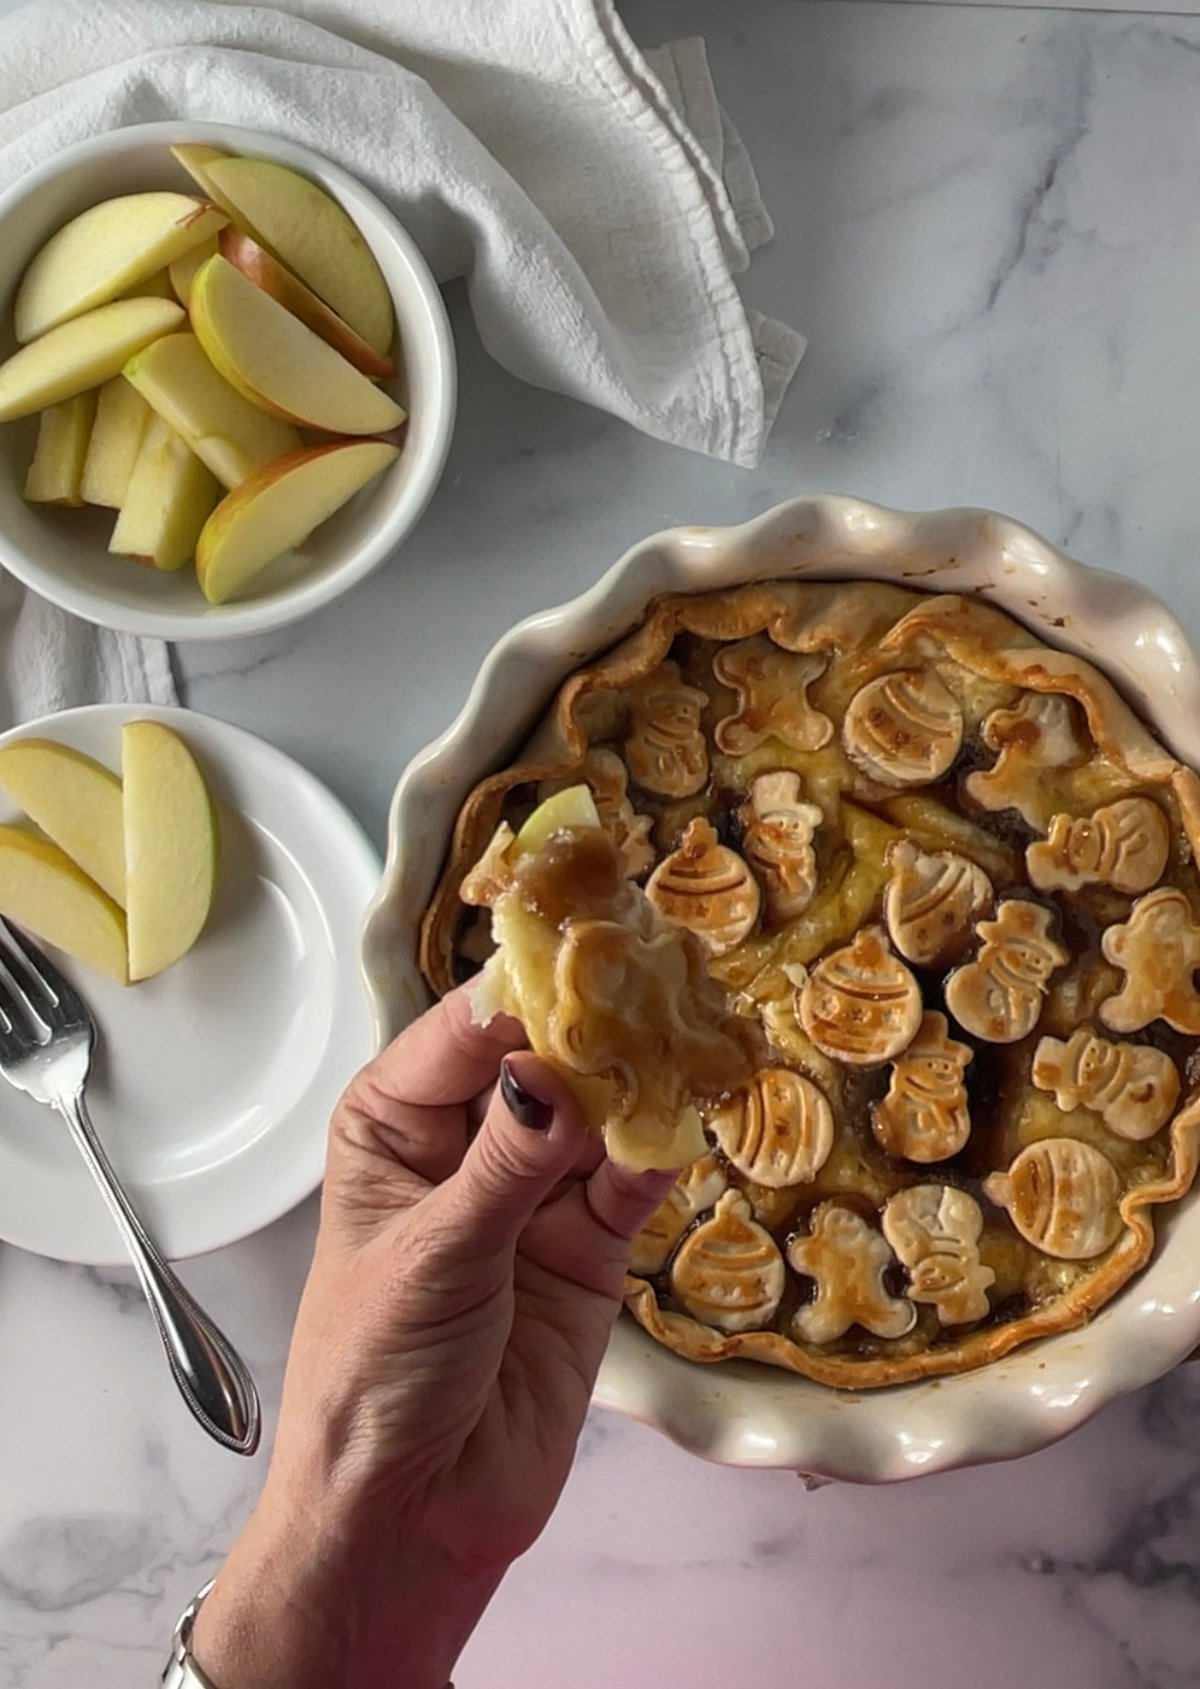 Brown sugar baked brie or havarti with apples on the side.